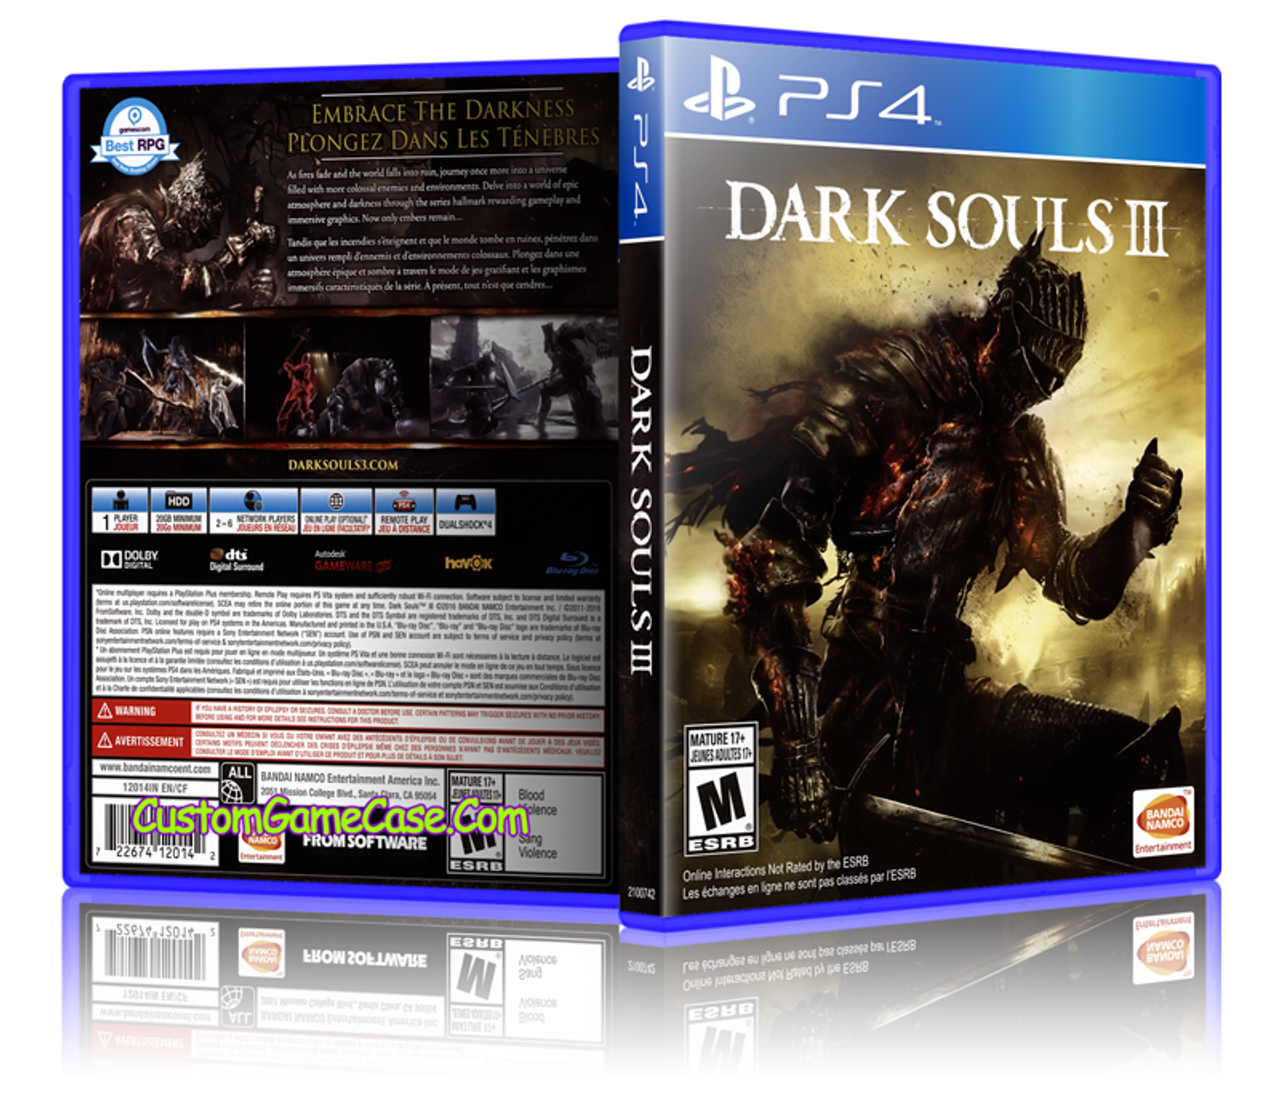 Dark Souls III Playstation 4 PS4 Game For Sale